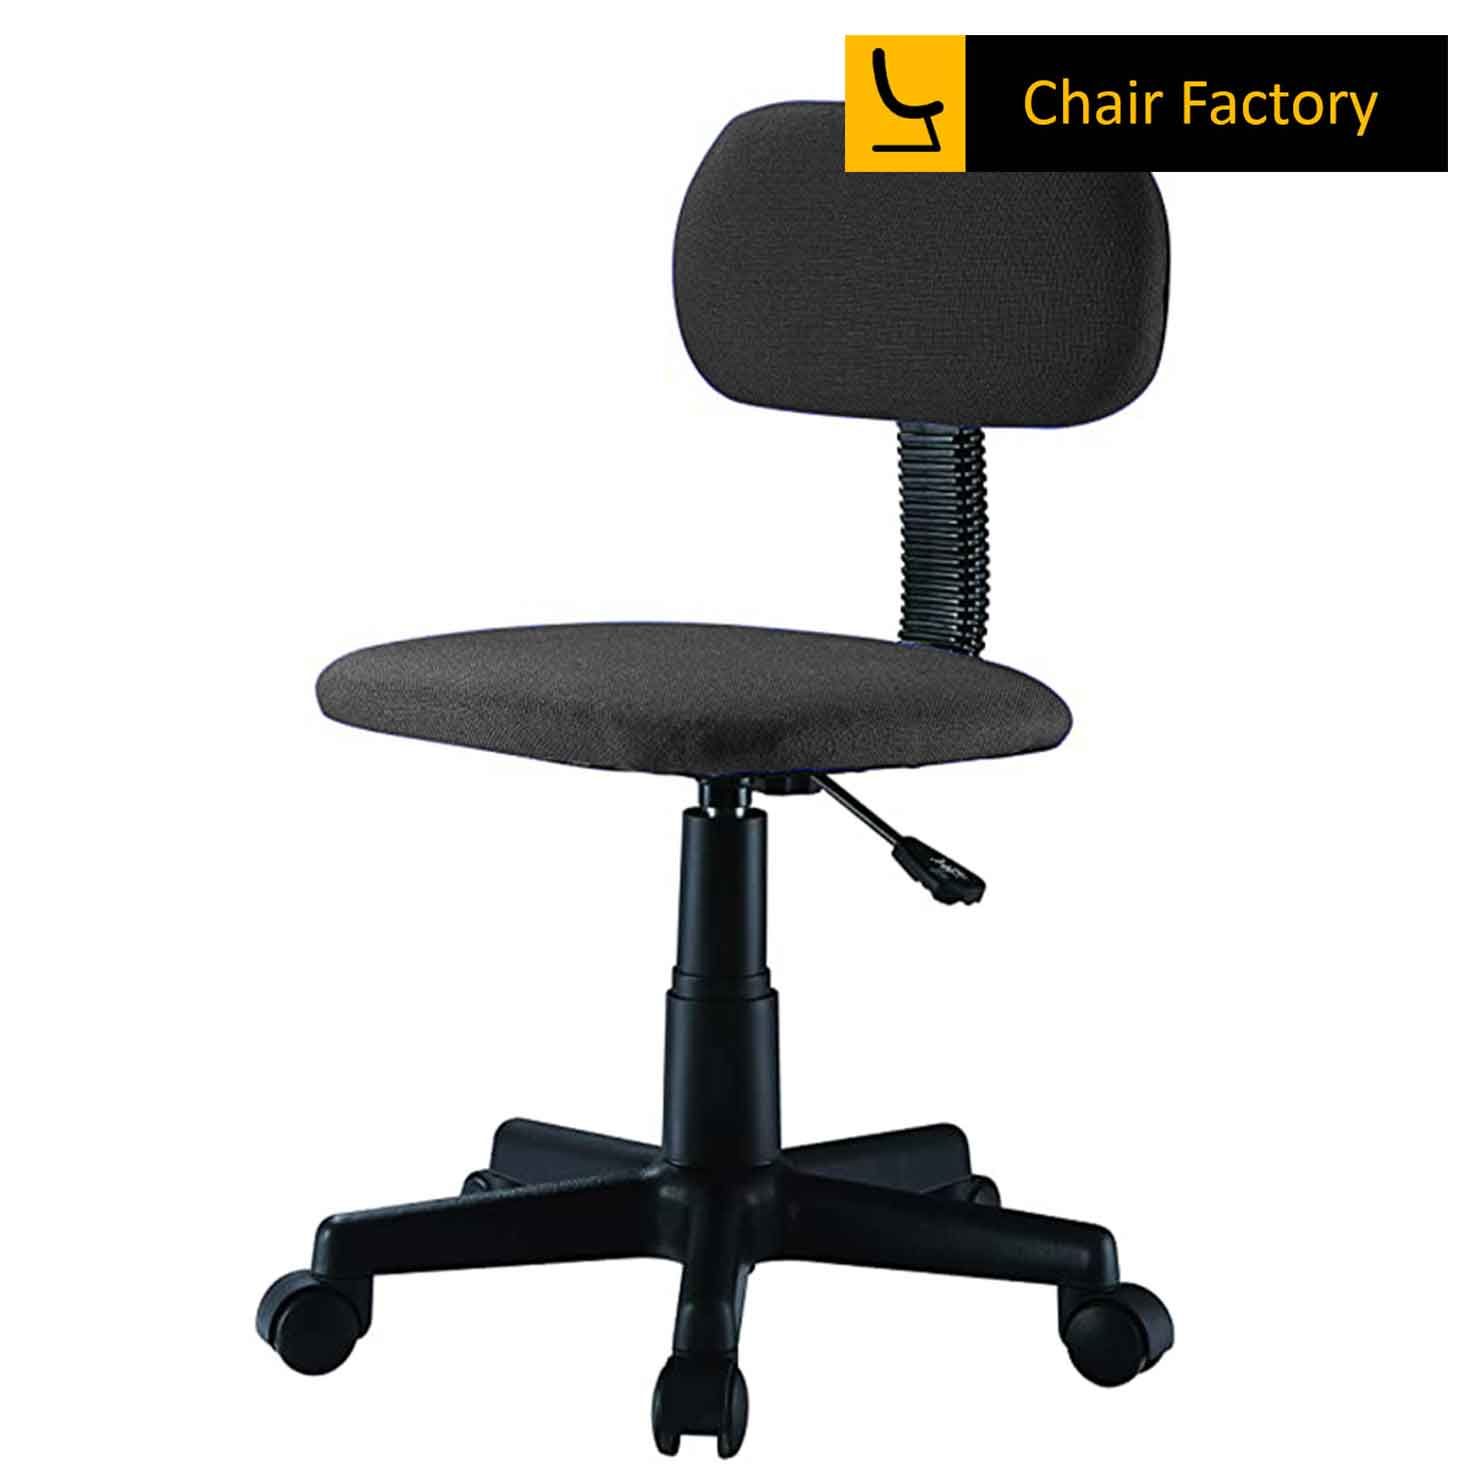 Cuber black lab chair without arm